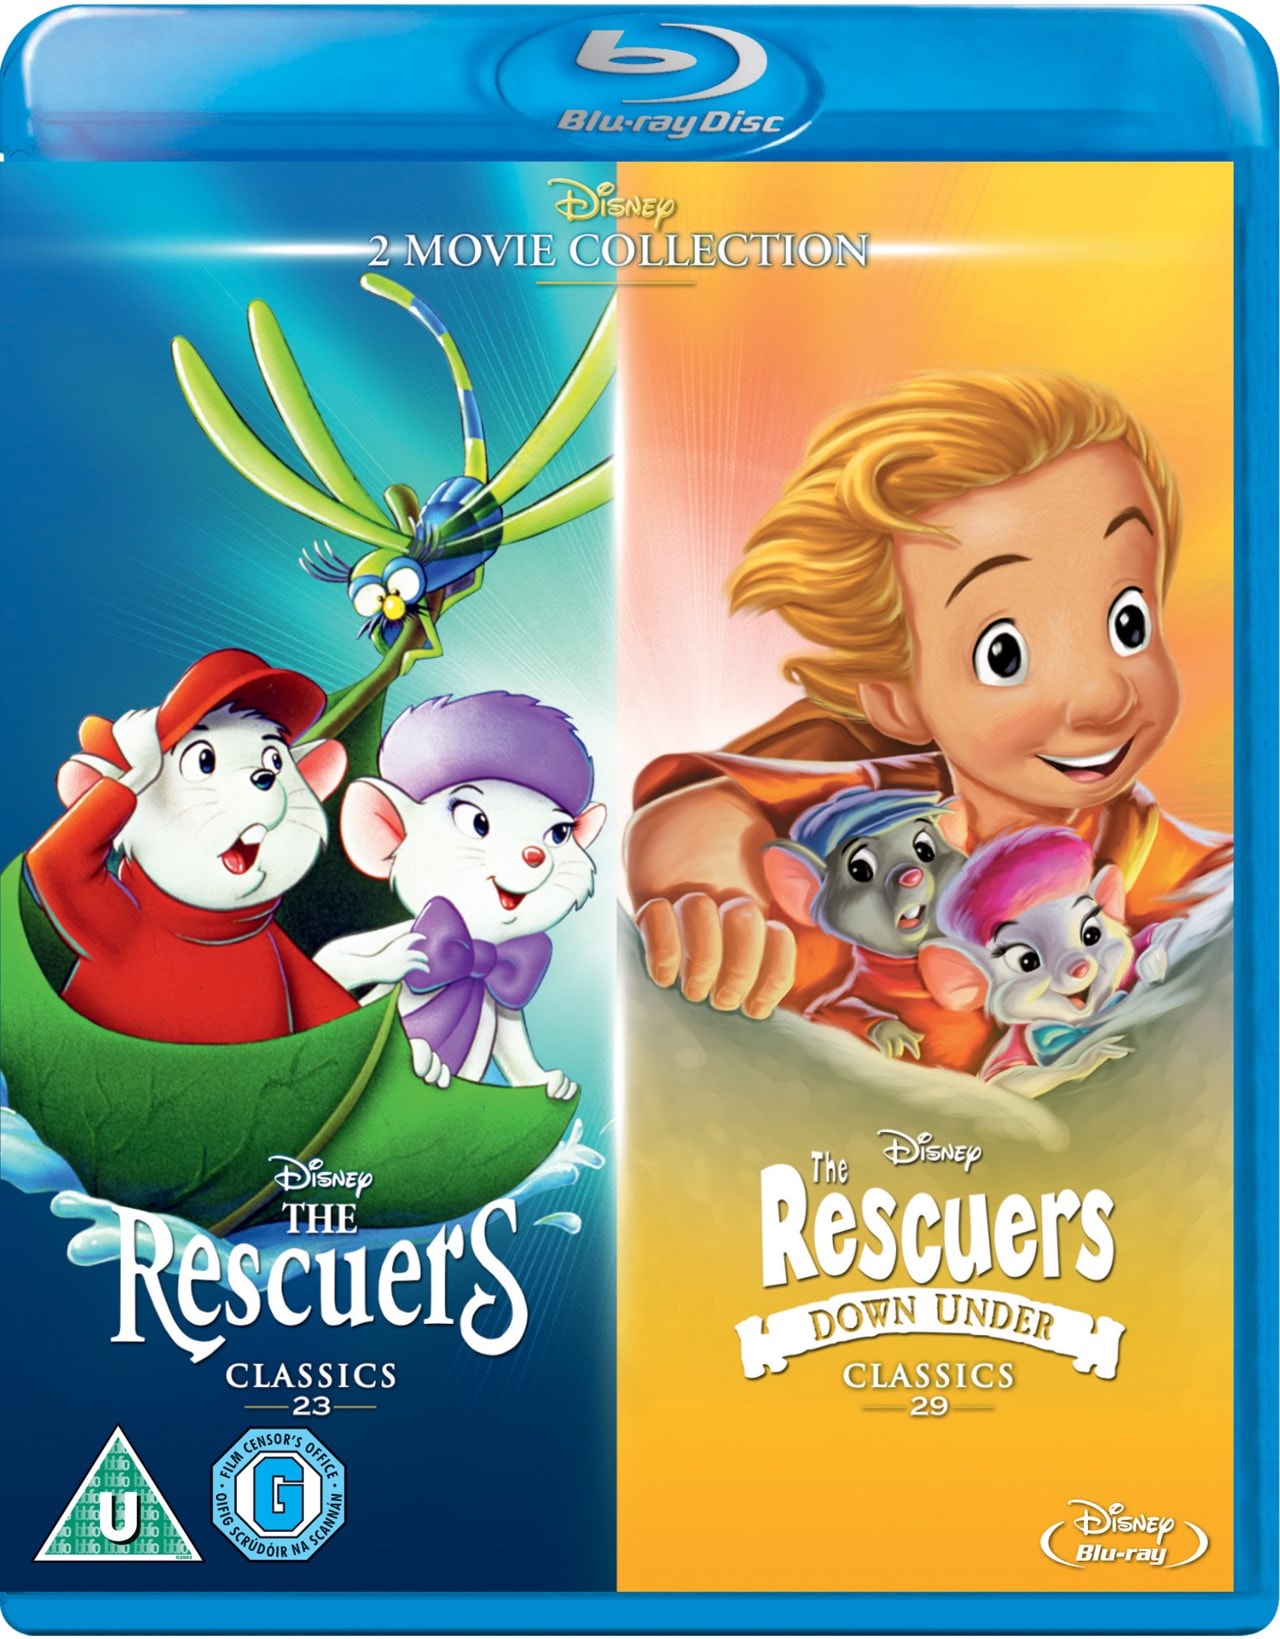 The Rescuers/The Rescuers Down Under.